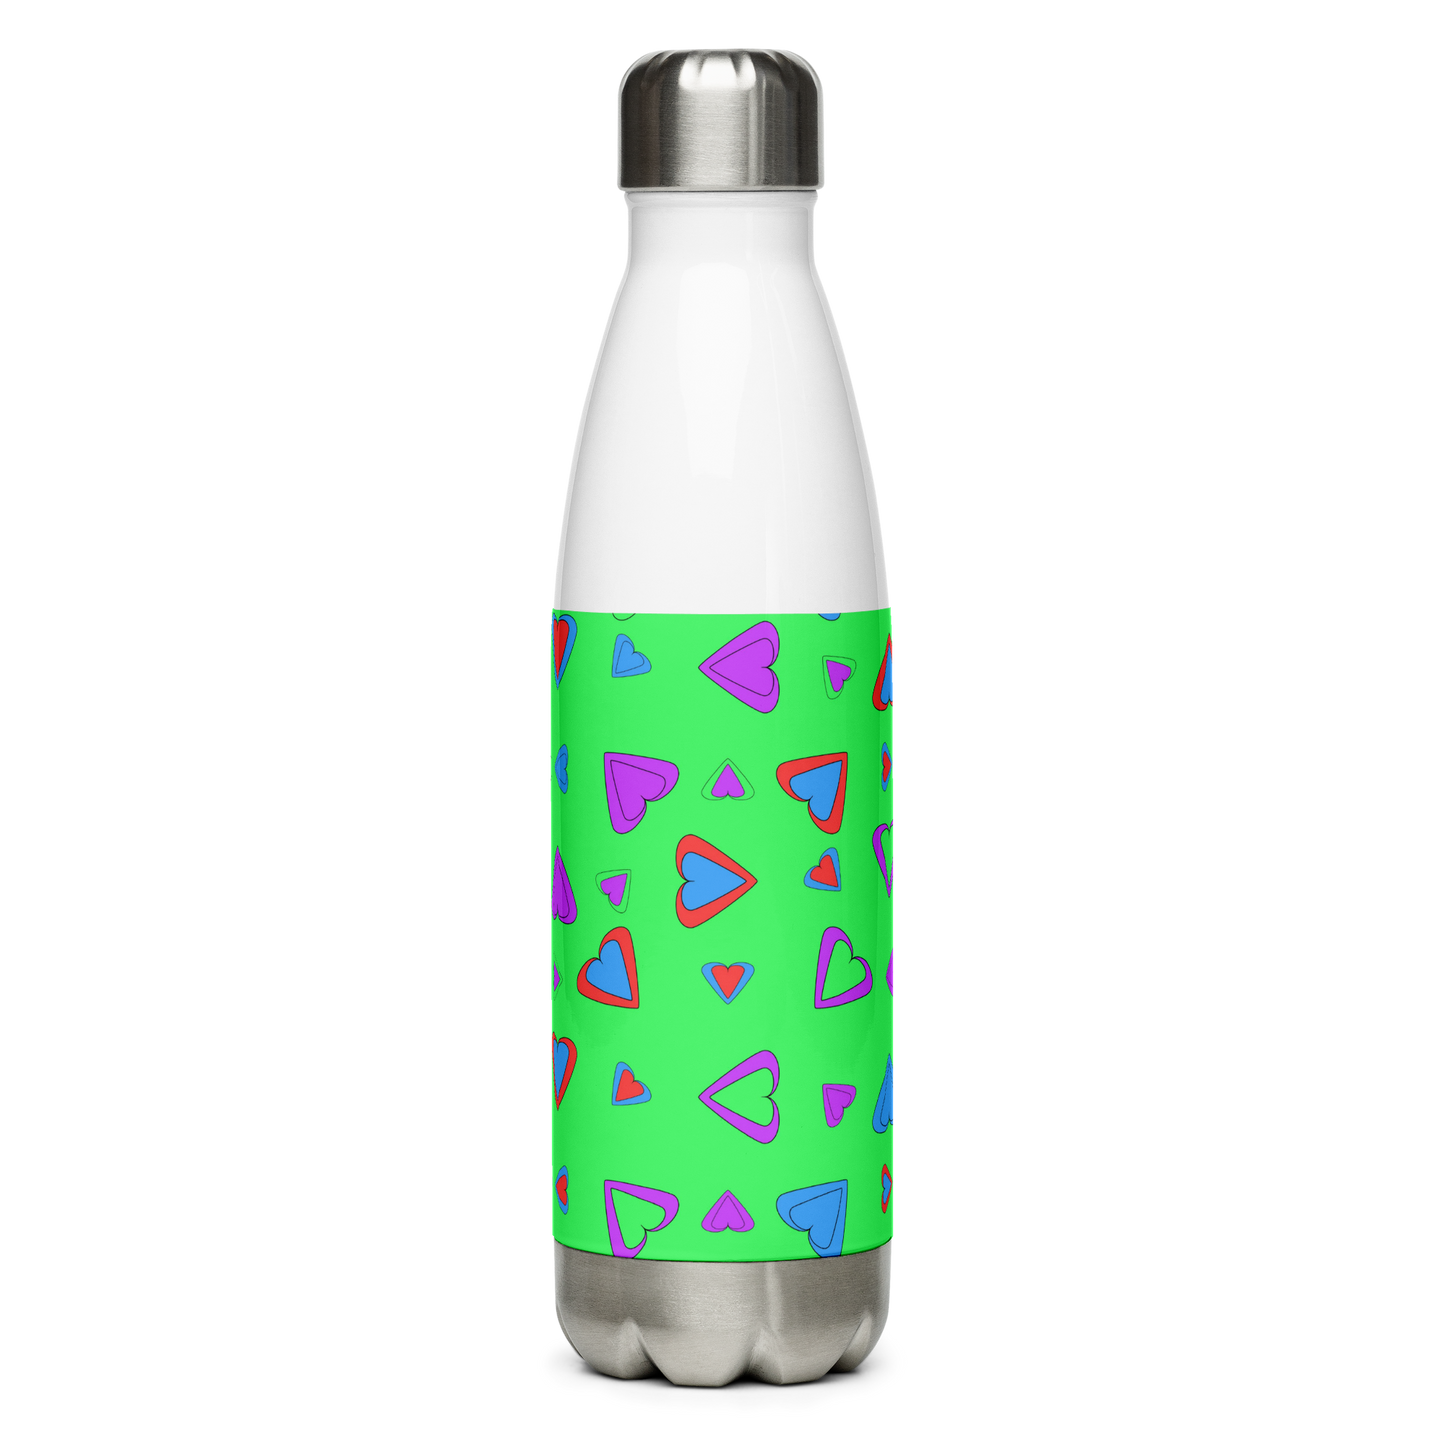 Rainbow Of Hearts | Batch 01 | Seamless Patterns | Stainless Steel Water Bottle - #7